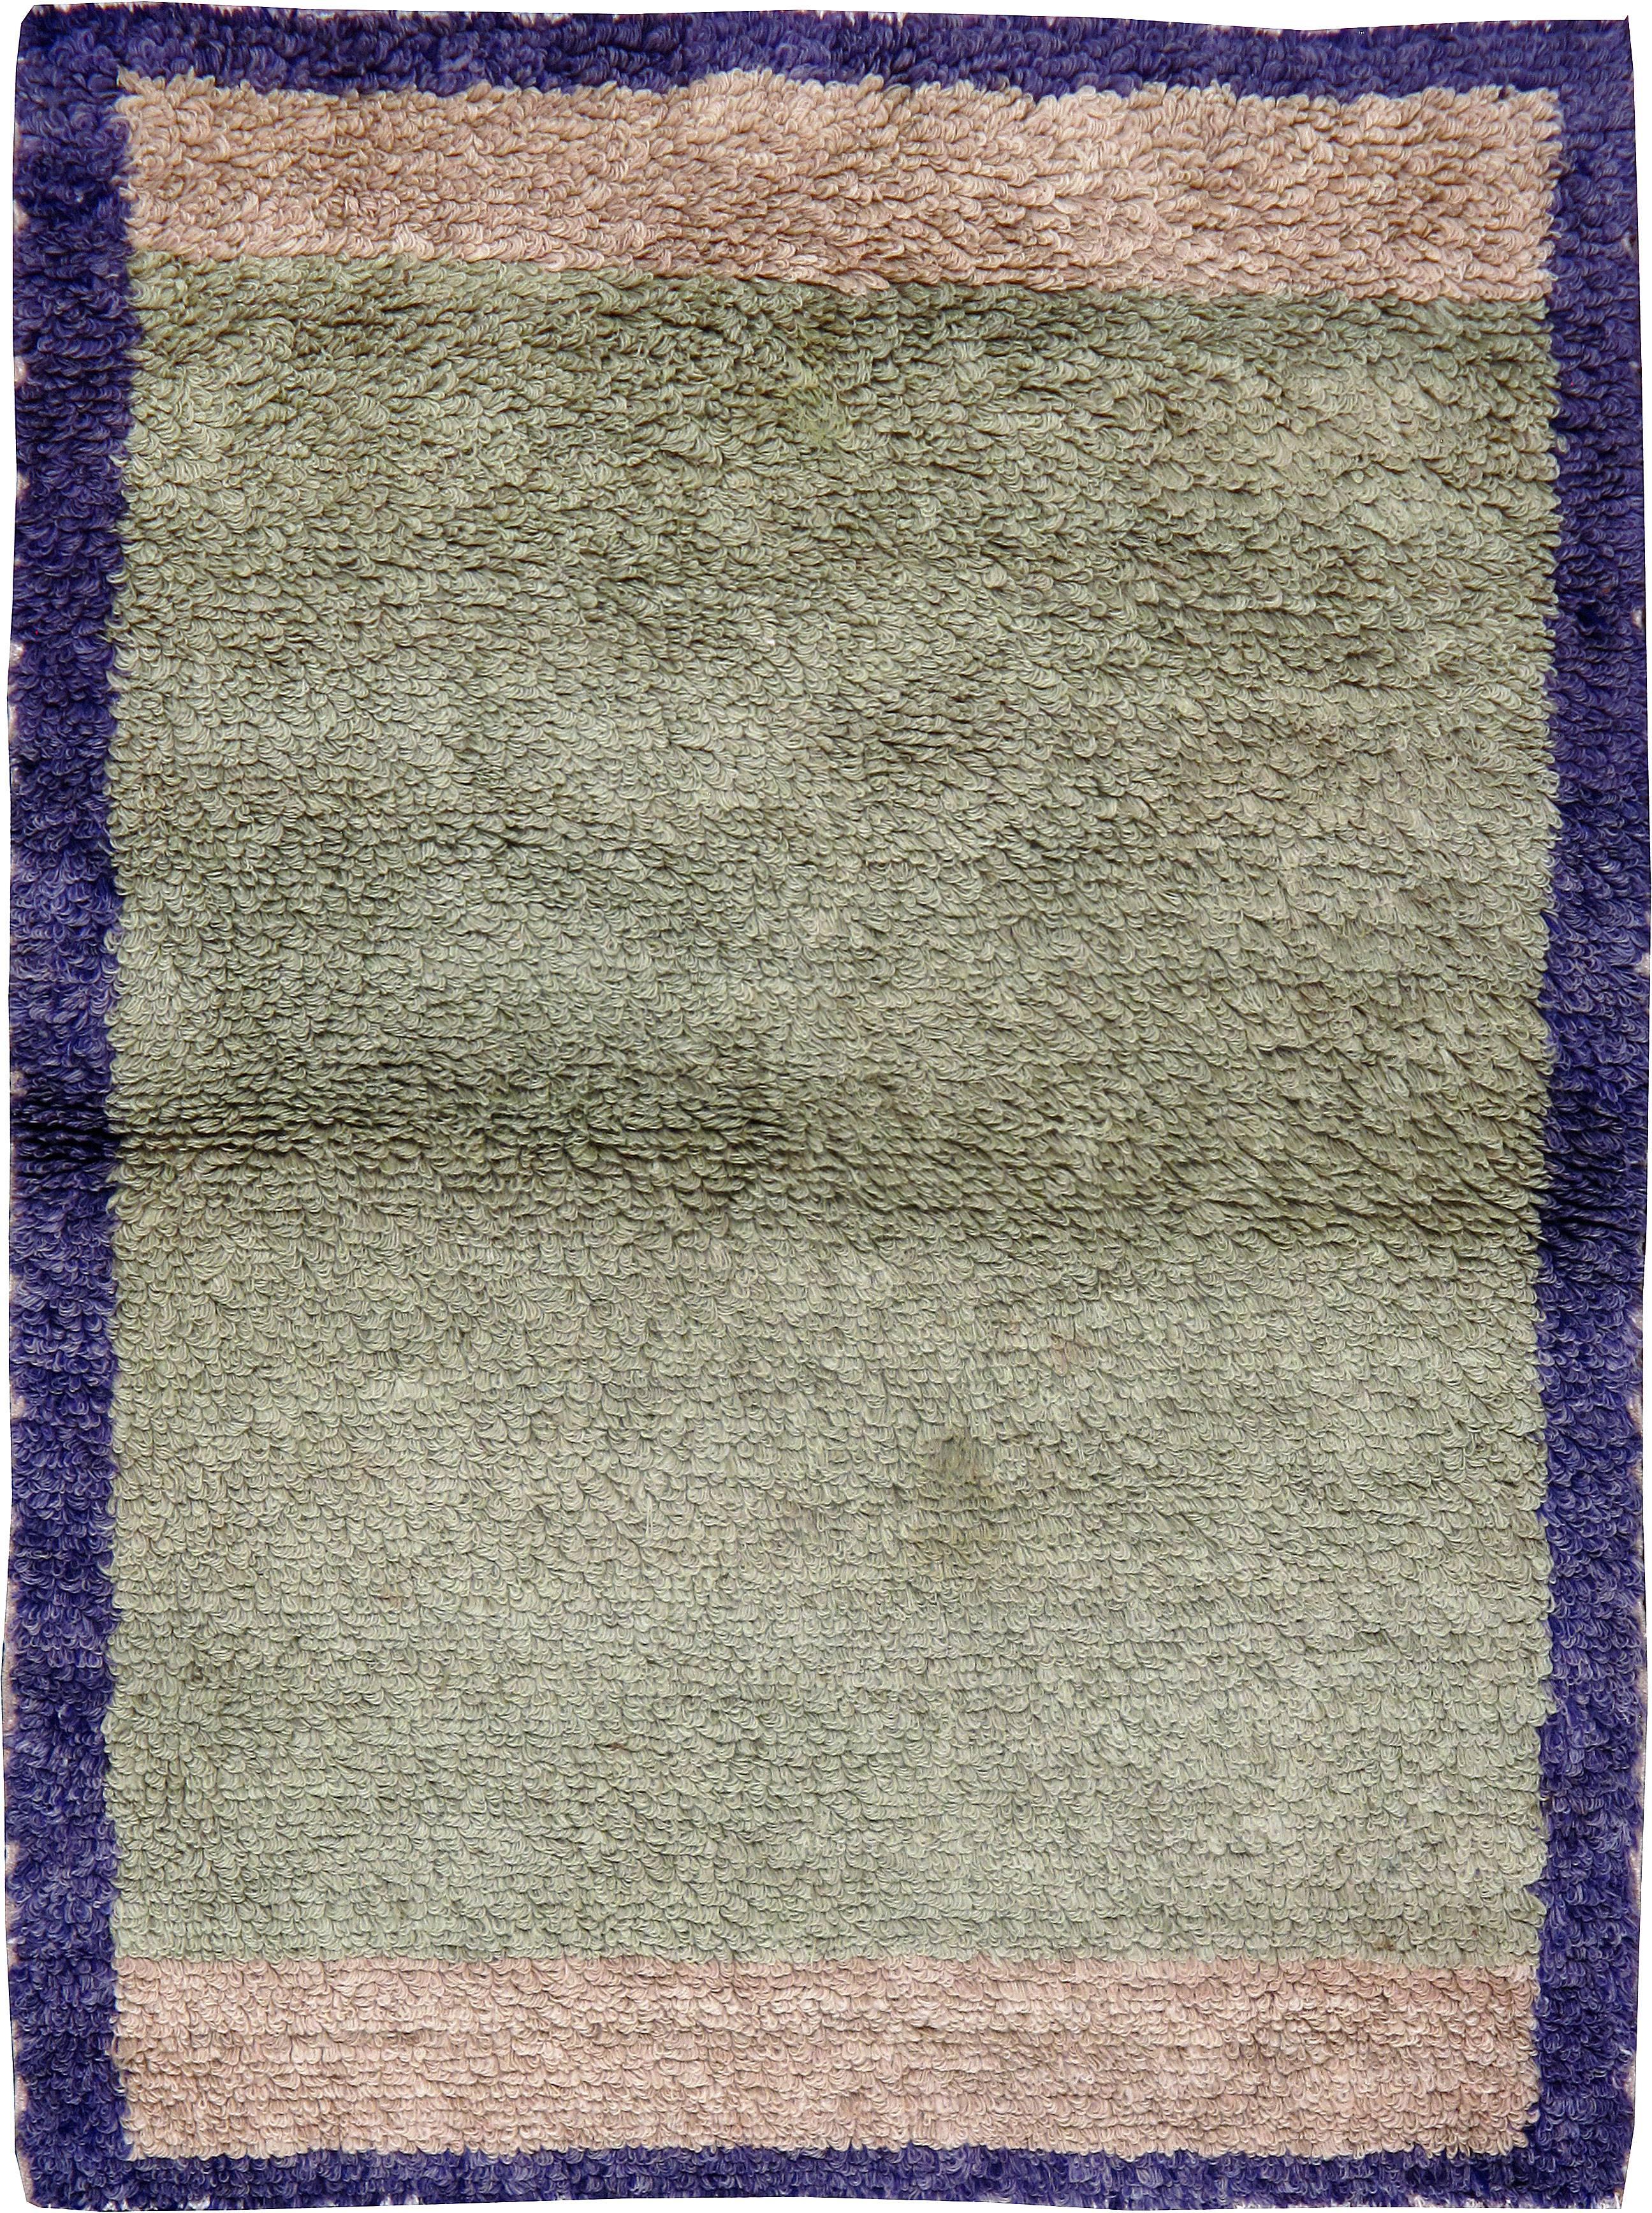 A vintage Turkish Konia carpet with mint and purple hues from the mid-20th century.